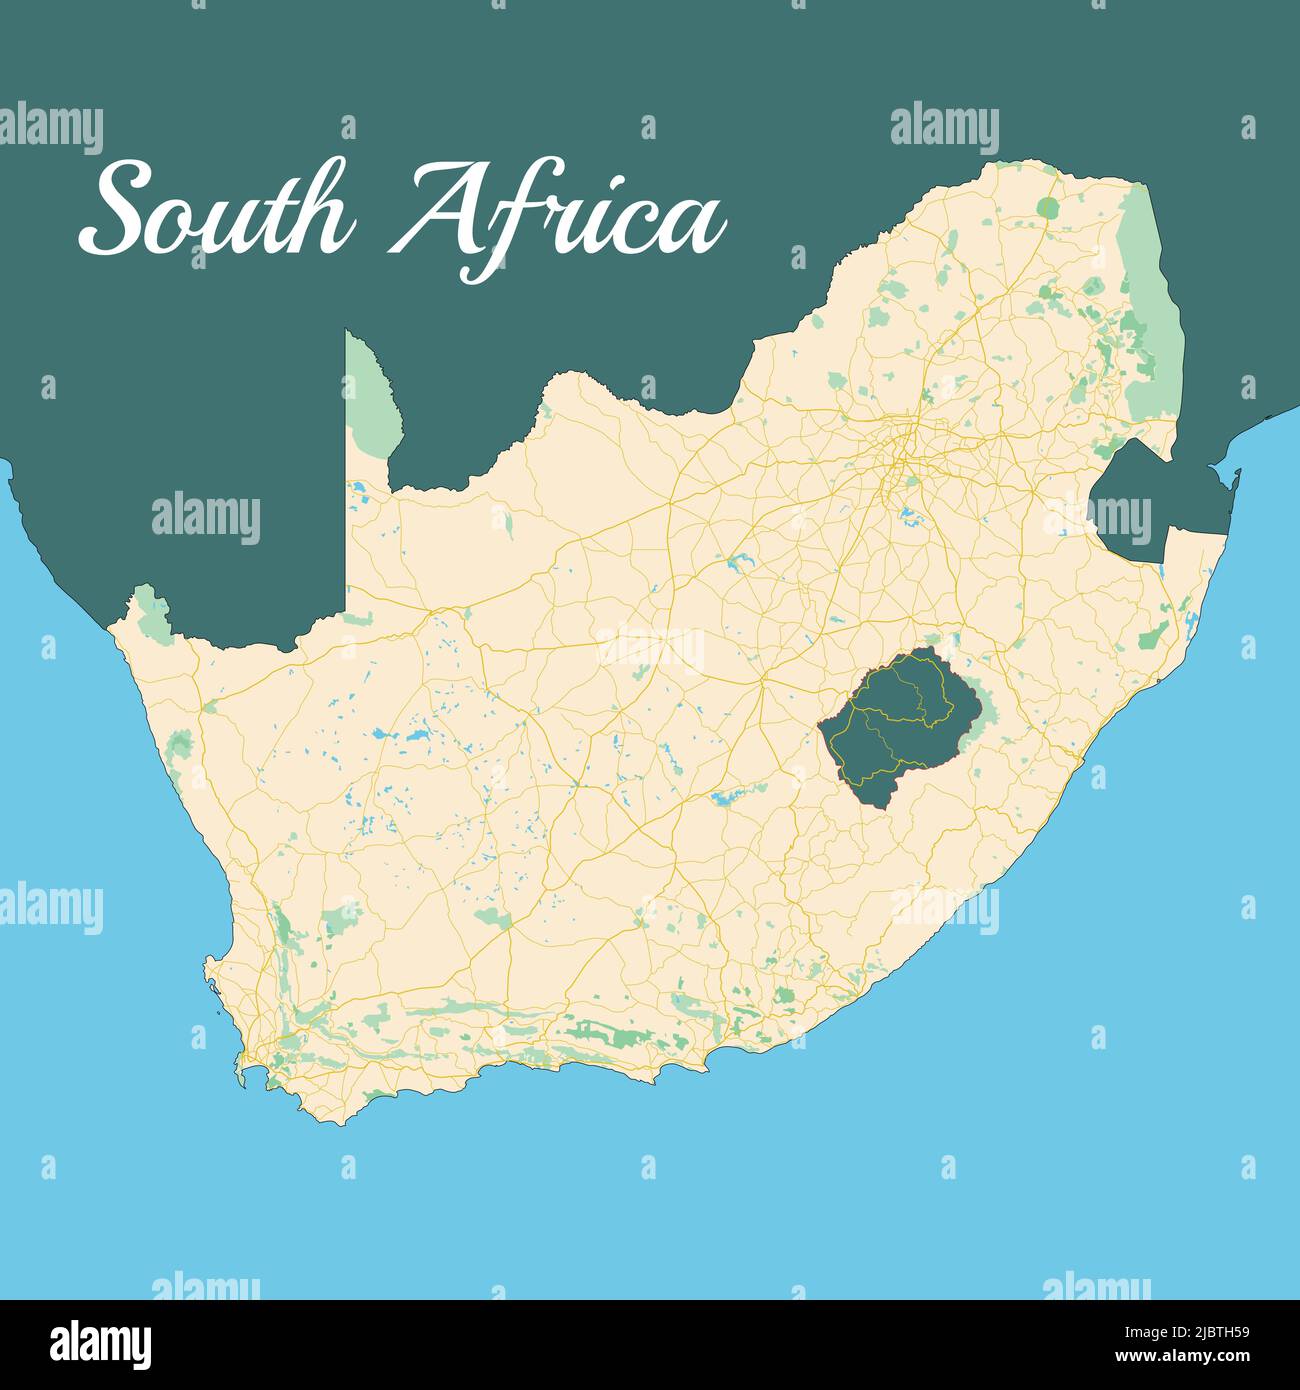 South Africa. Black and white background map, drawn with cartographic accuracy. A bird's-eye view. Stock Vector